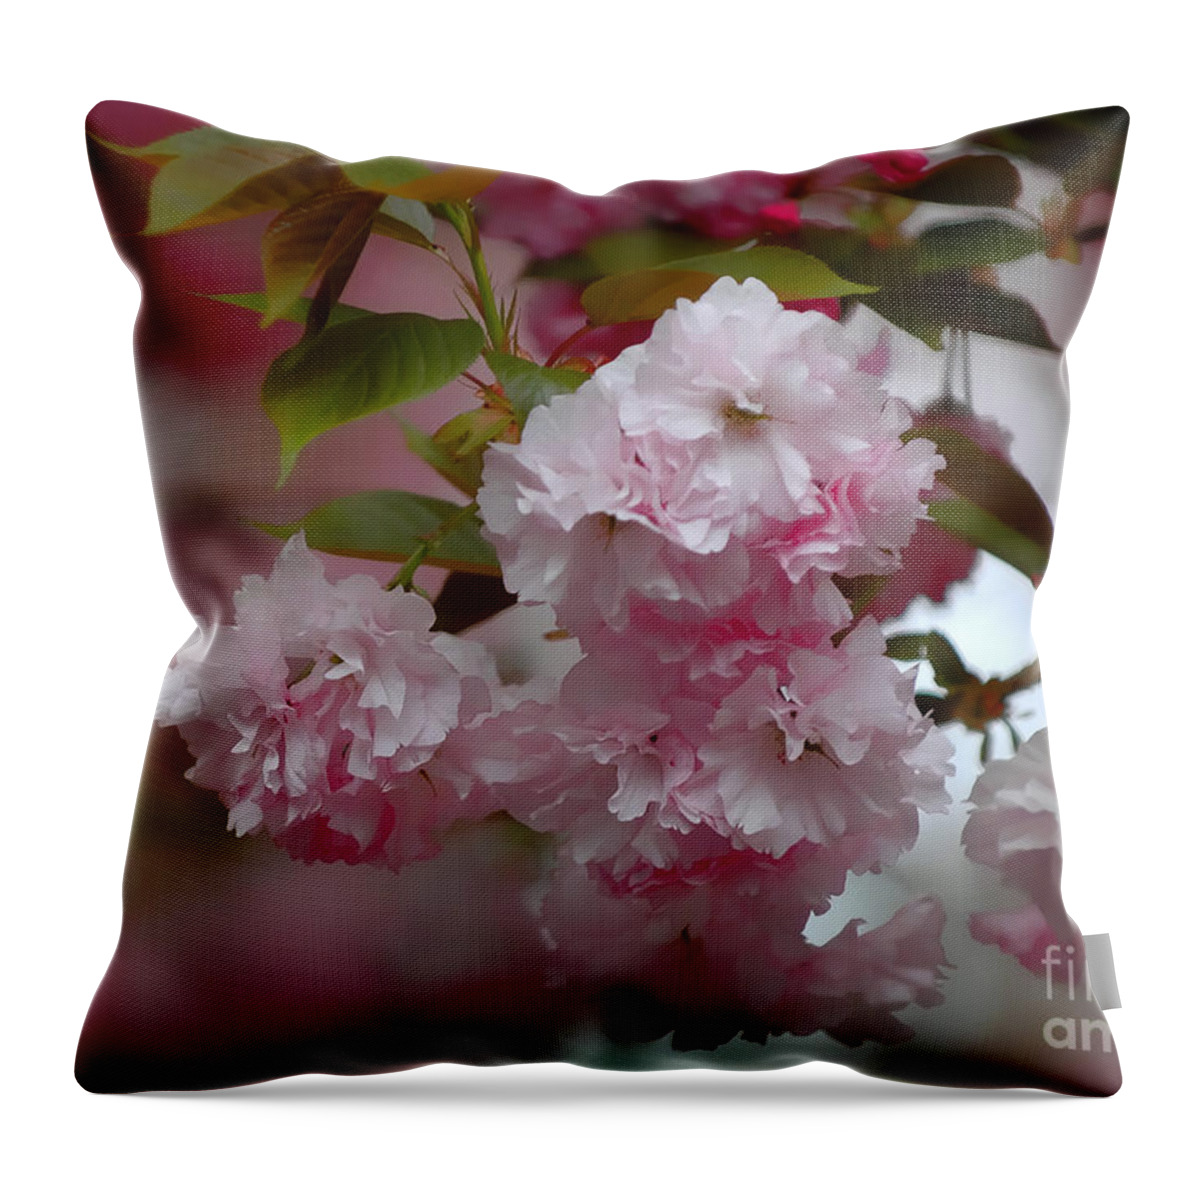 Landscape Throw Pillow featuring the photograph Cherry blossom by Sami Martin